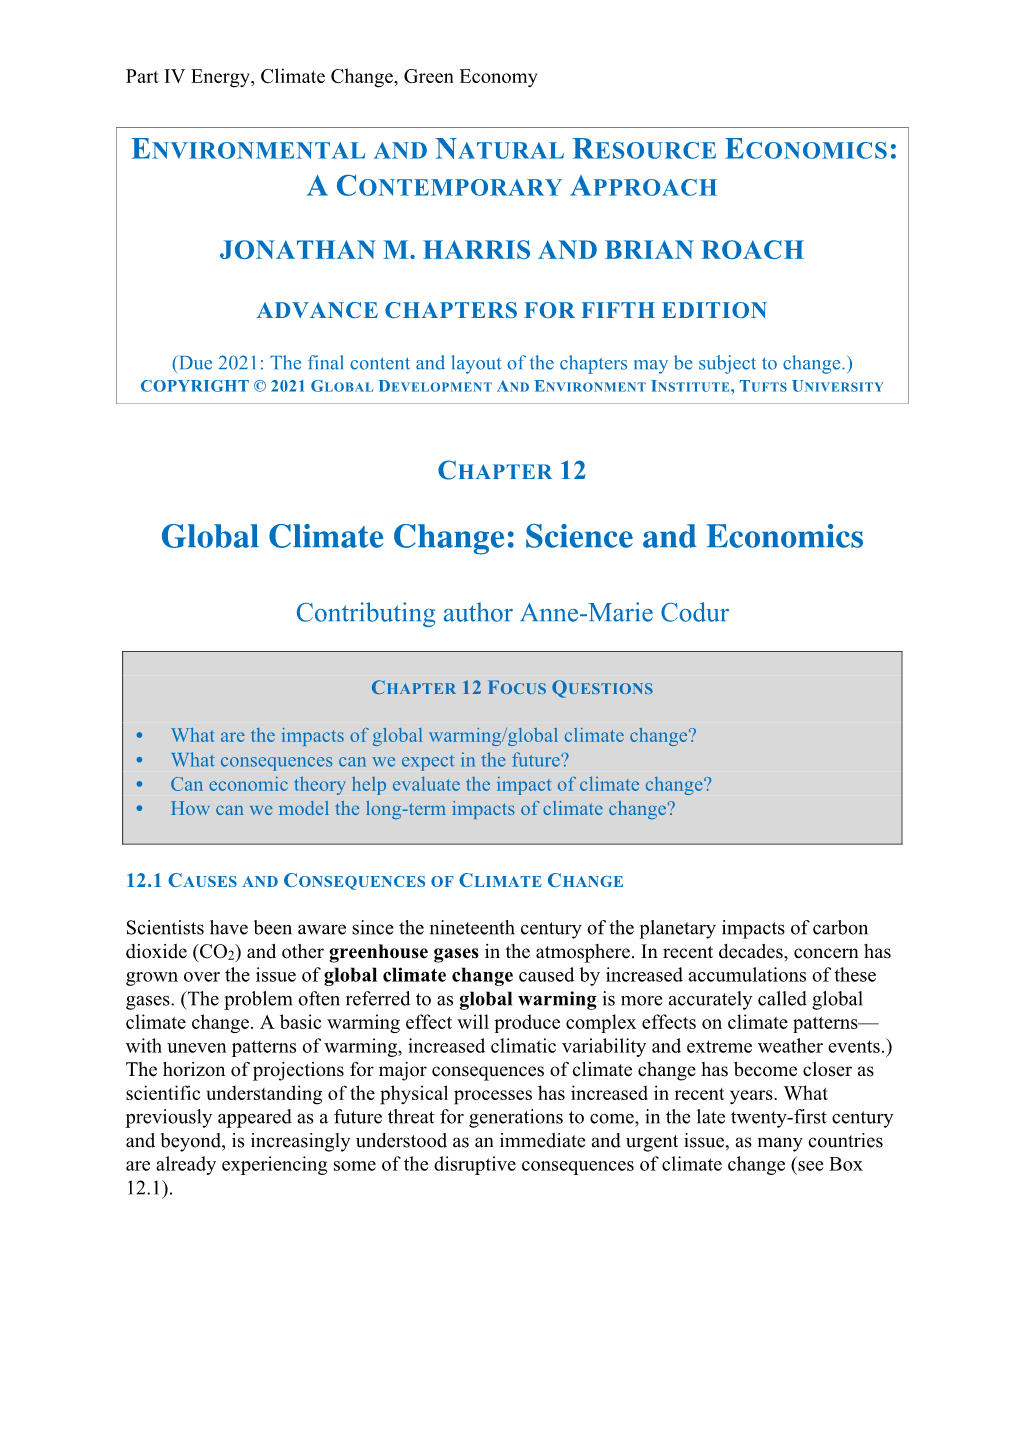 Chapter 12: Global Climate Change: Science and Economics